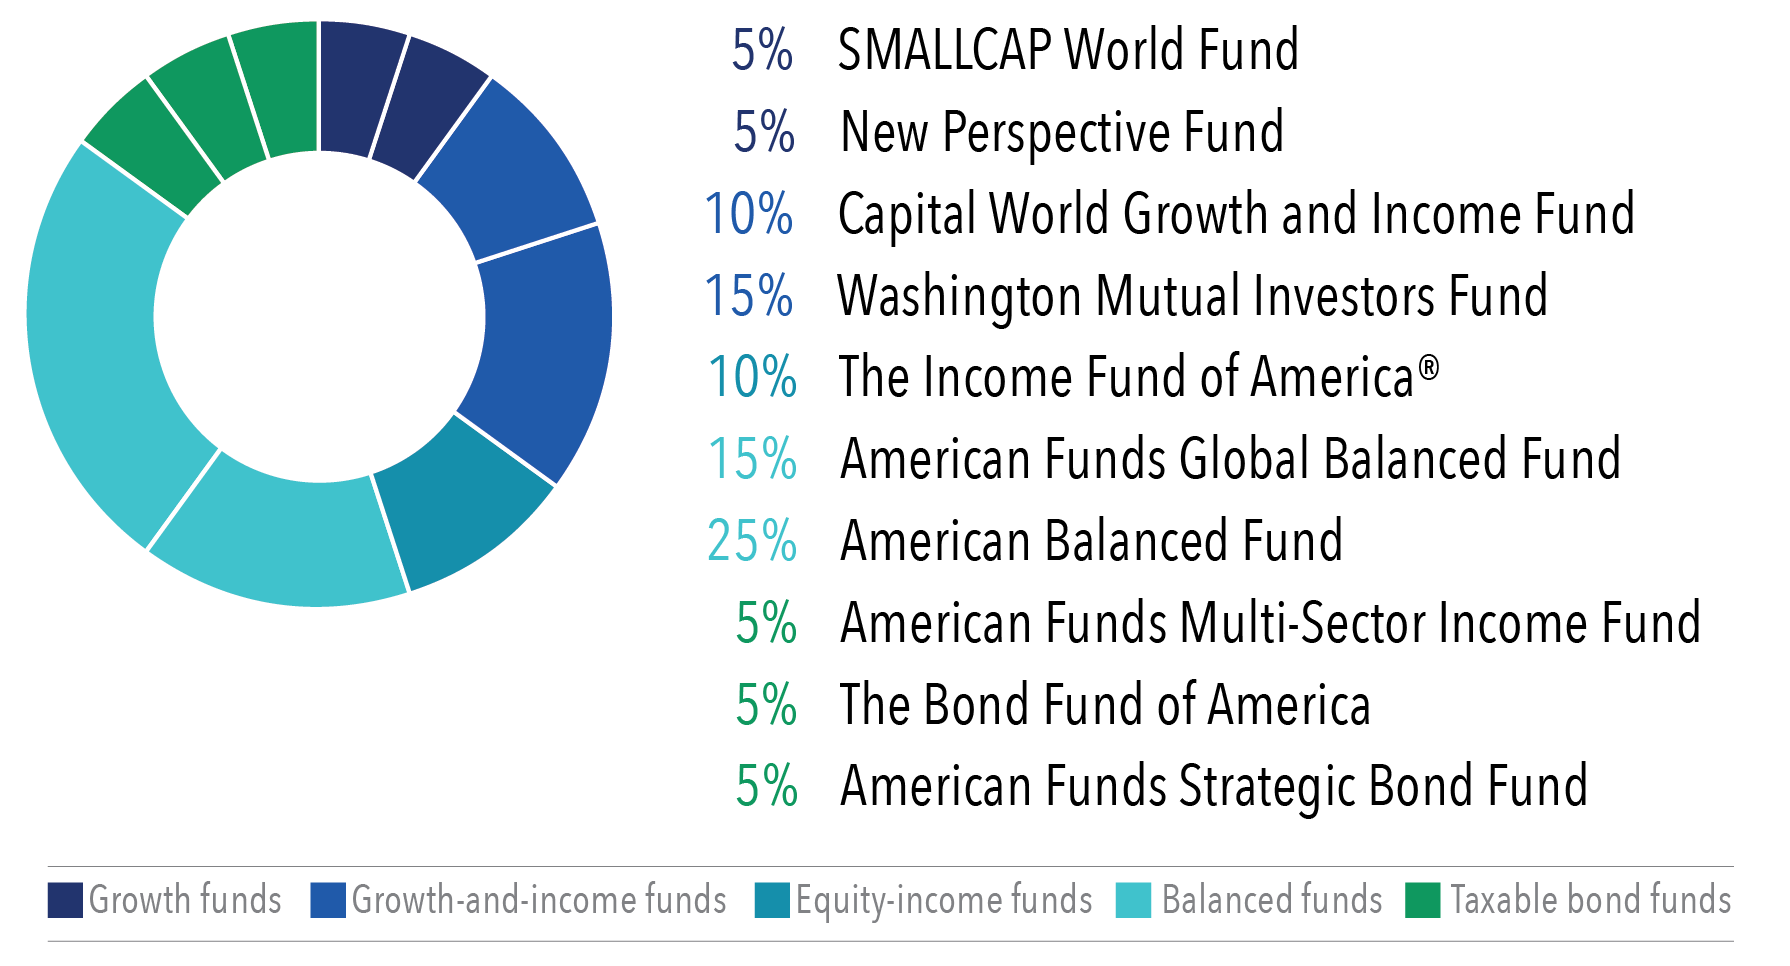 Donut chart displays a target allocation of 5% to SMALLCAP World Fund, 5% to New Perspective Fund, 10% to Capital World Growth and Income Fund, 15% to Washington Mutual Investors Fund, 10% to The Income Fund of America, 15% to American Funds Global Balanced Fund, 25% to American Balanced Fund, 5% to American Funds Multi-Sector Income Fund, 5% to The Bond Fund of America, 5% to American Funds Strategic Bond Fund.